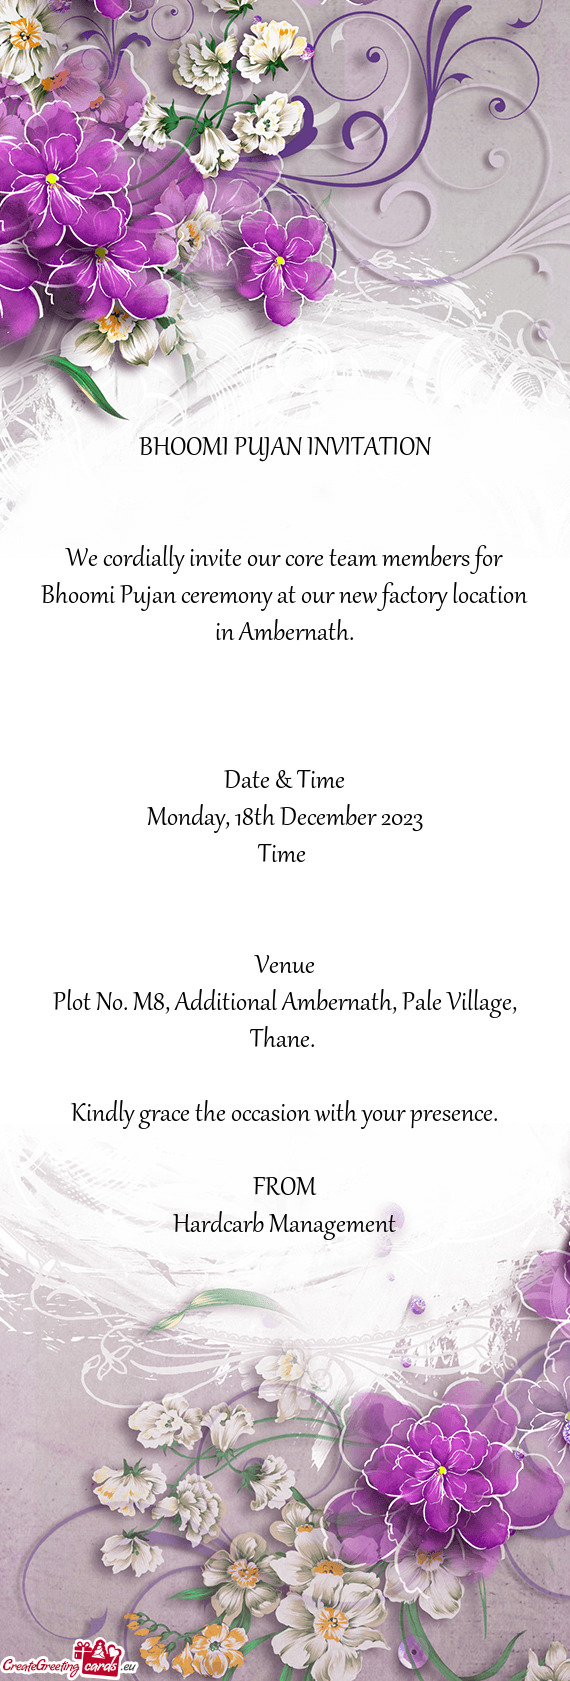 We cordially invite our core team members for Bhoomi Pujan ceremony at our new factory location in A